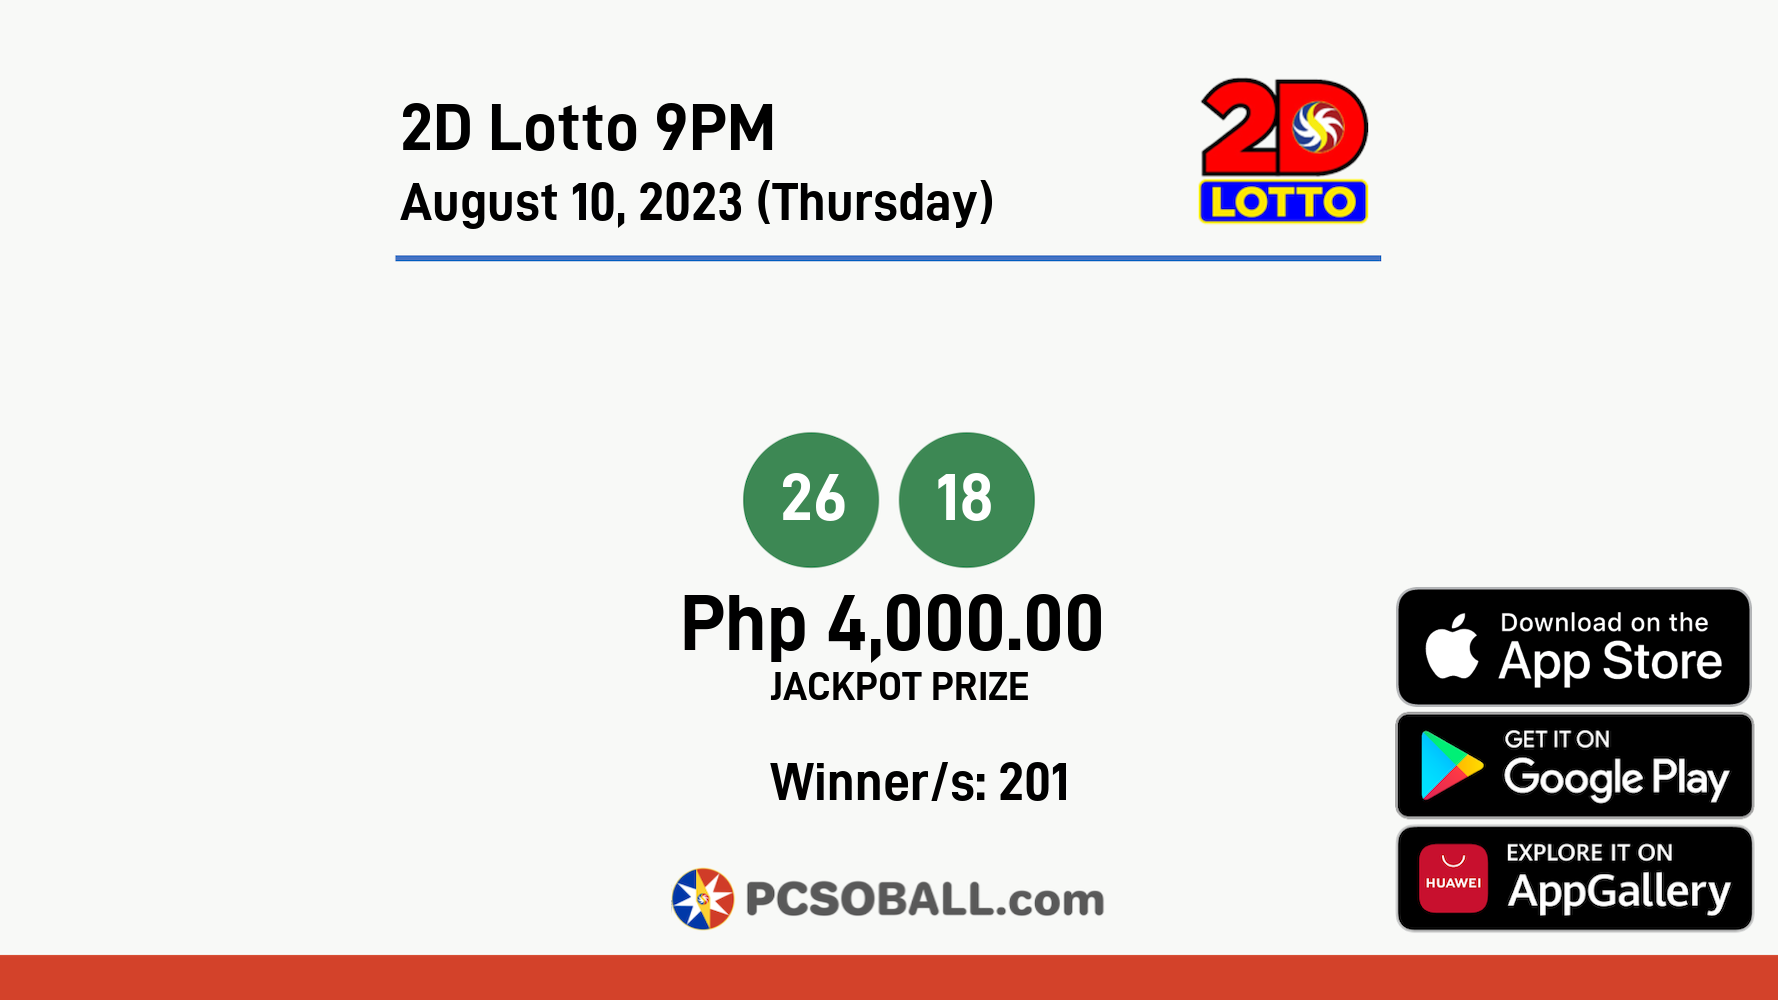 2D Lotto 9PM August 10, 2023 (Thursday) Result